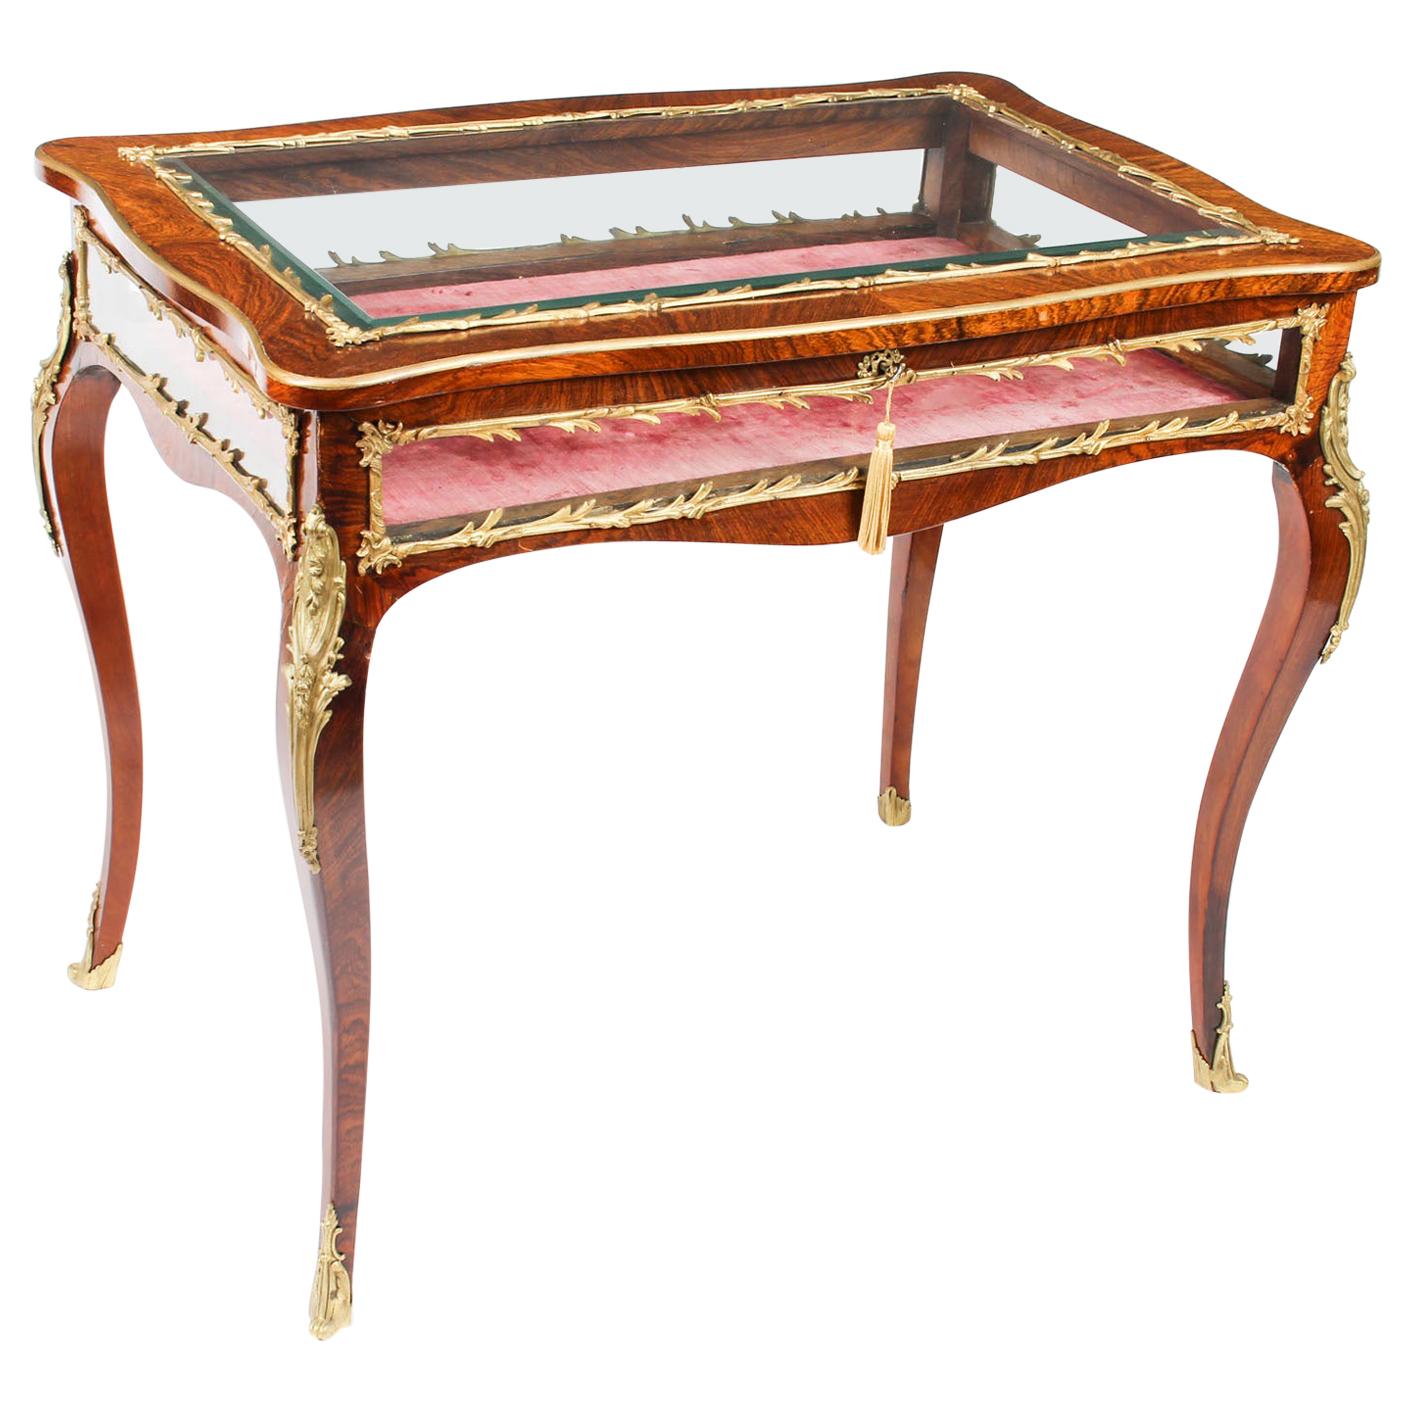 Antique French Ormolu Mounted Bijouterie Display Table, 19th Century